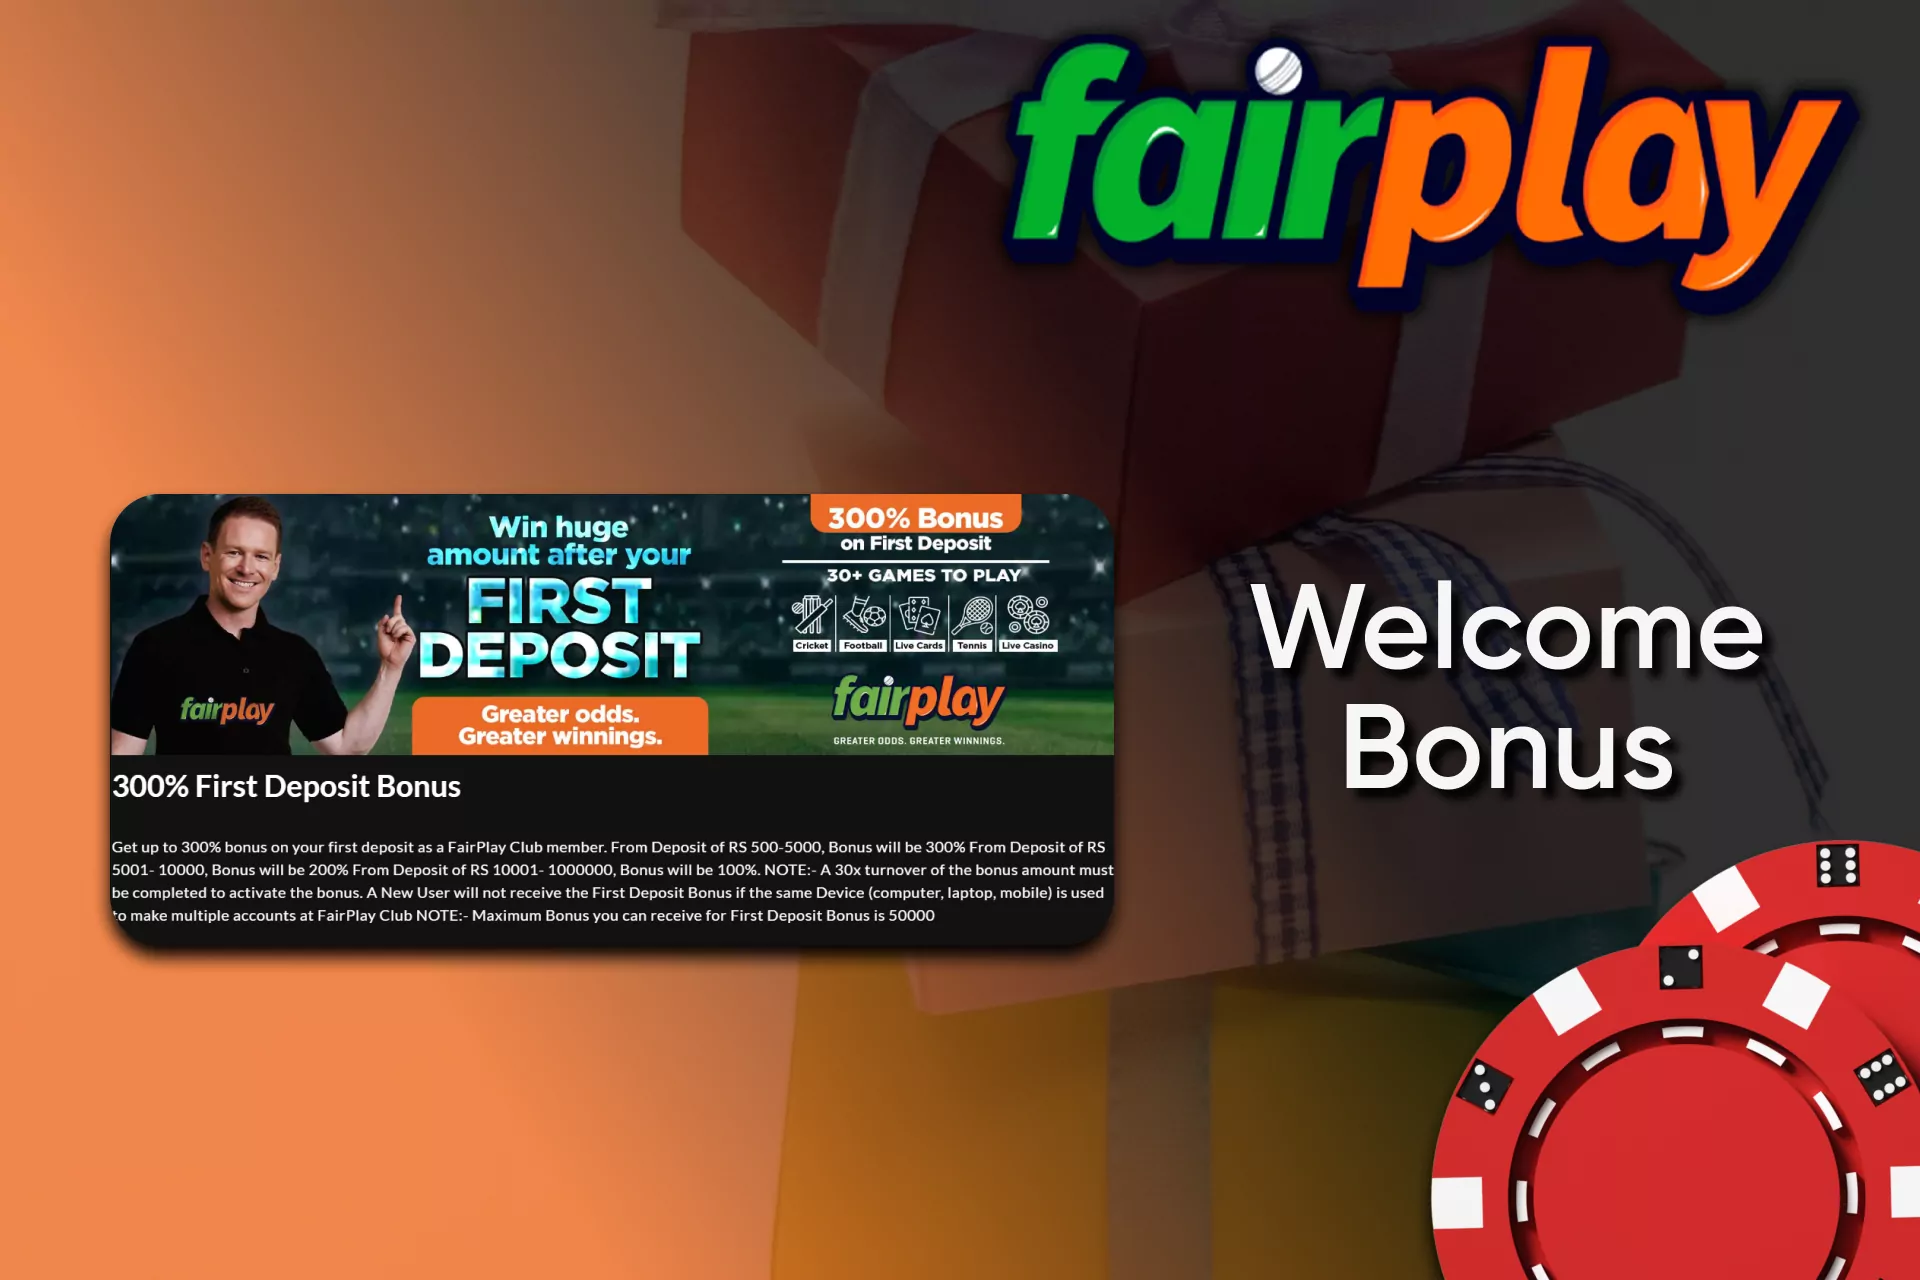 New users can count on a welcome bonus from Fairplay.